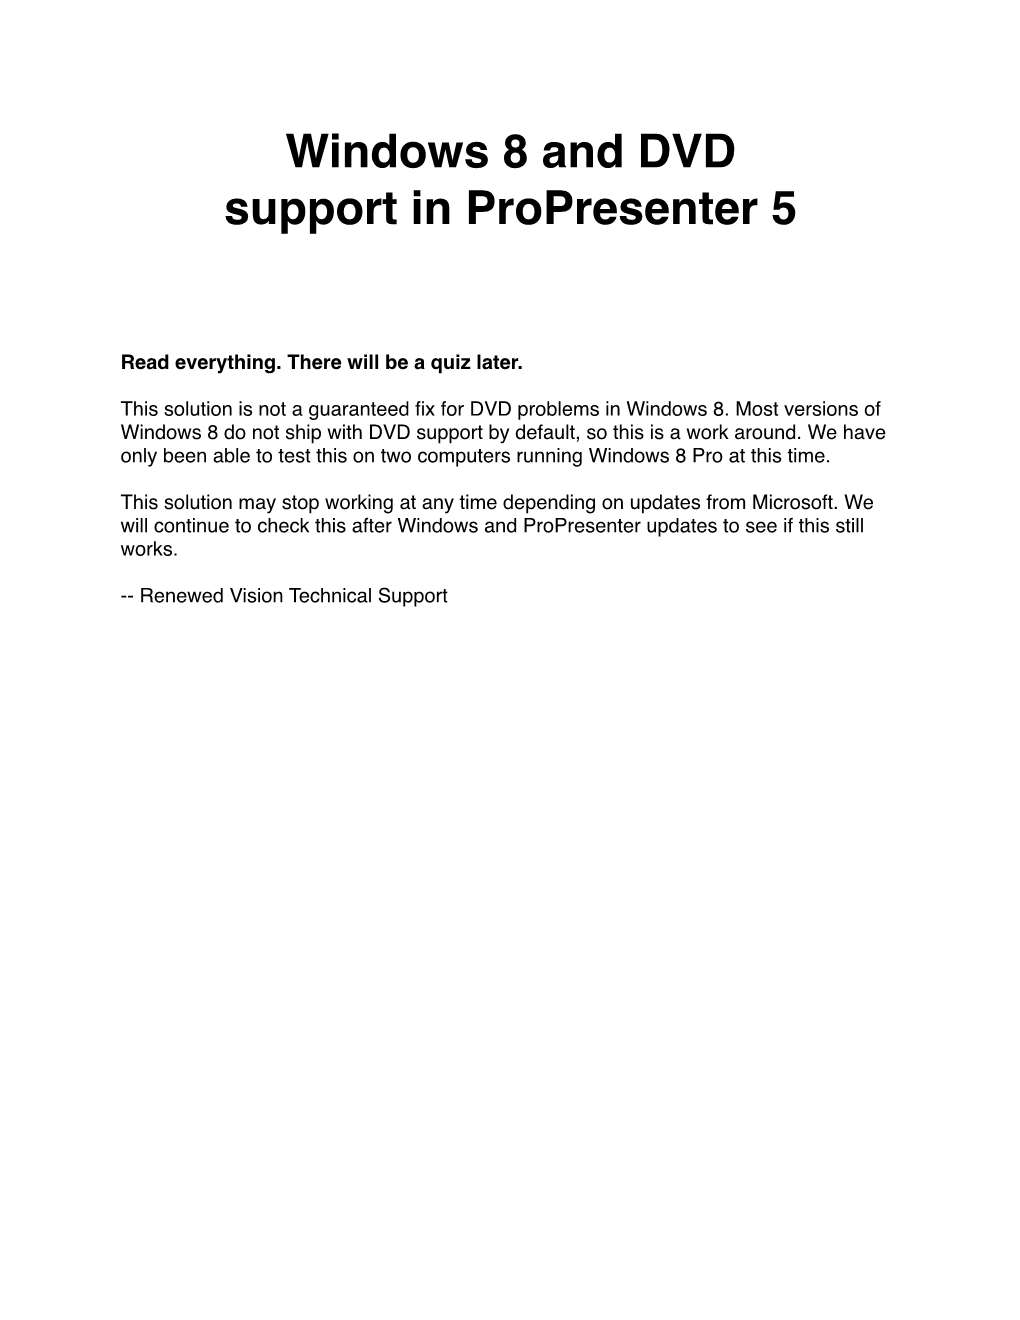 Windows 8 and DVD Support in Propresenter 5